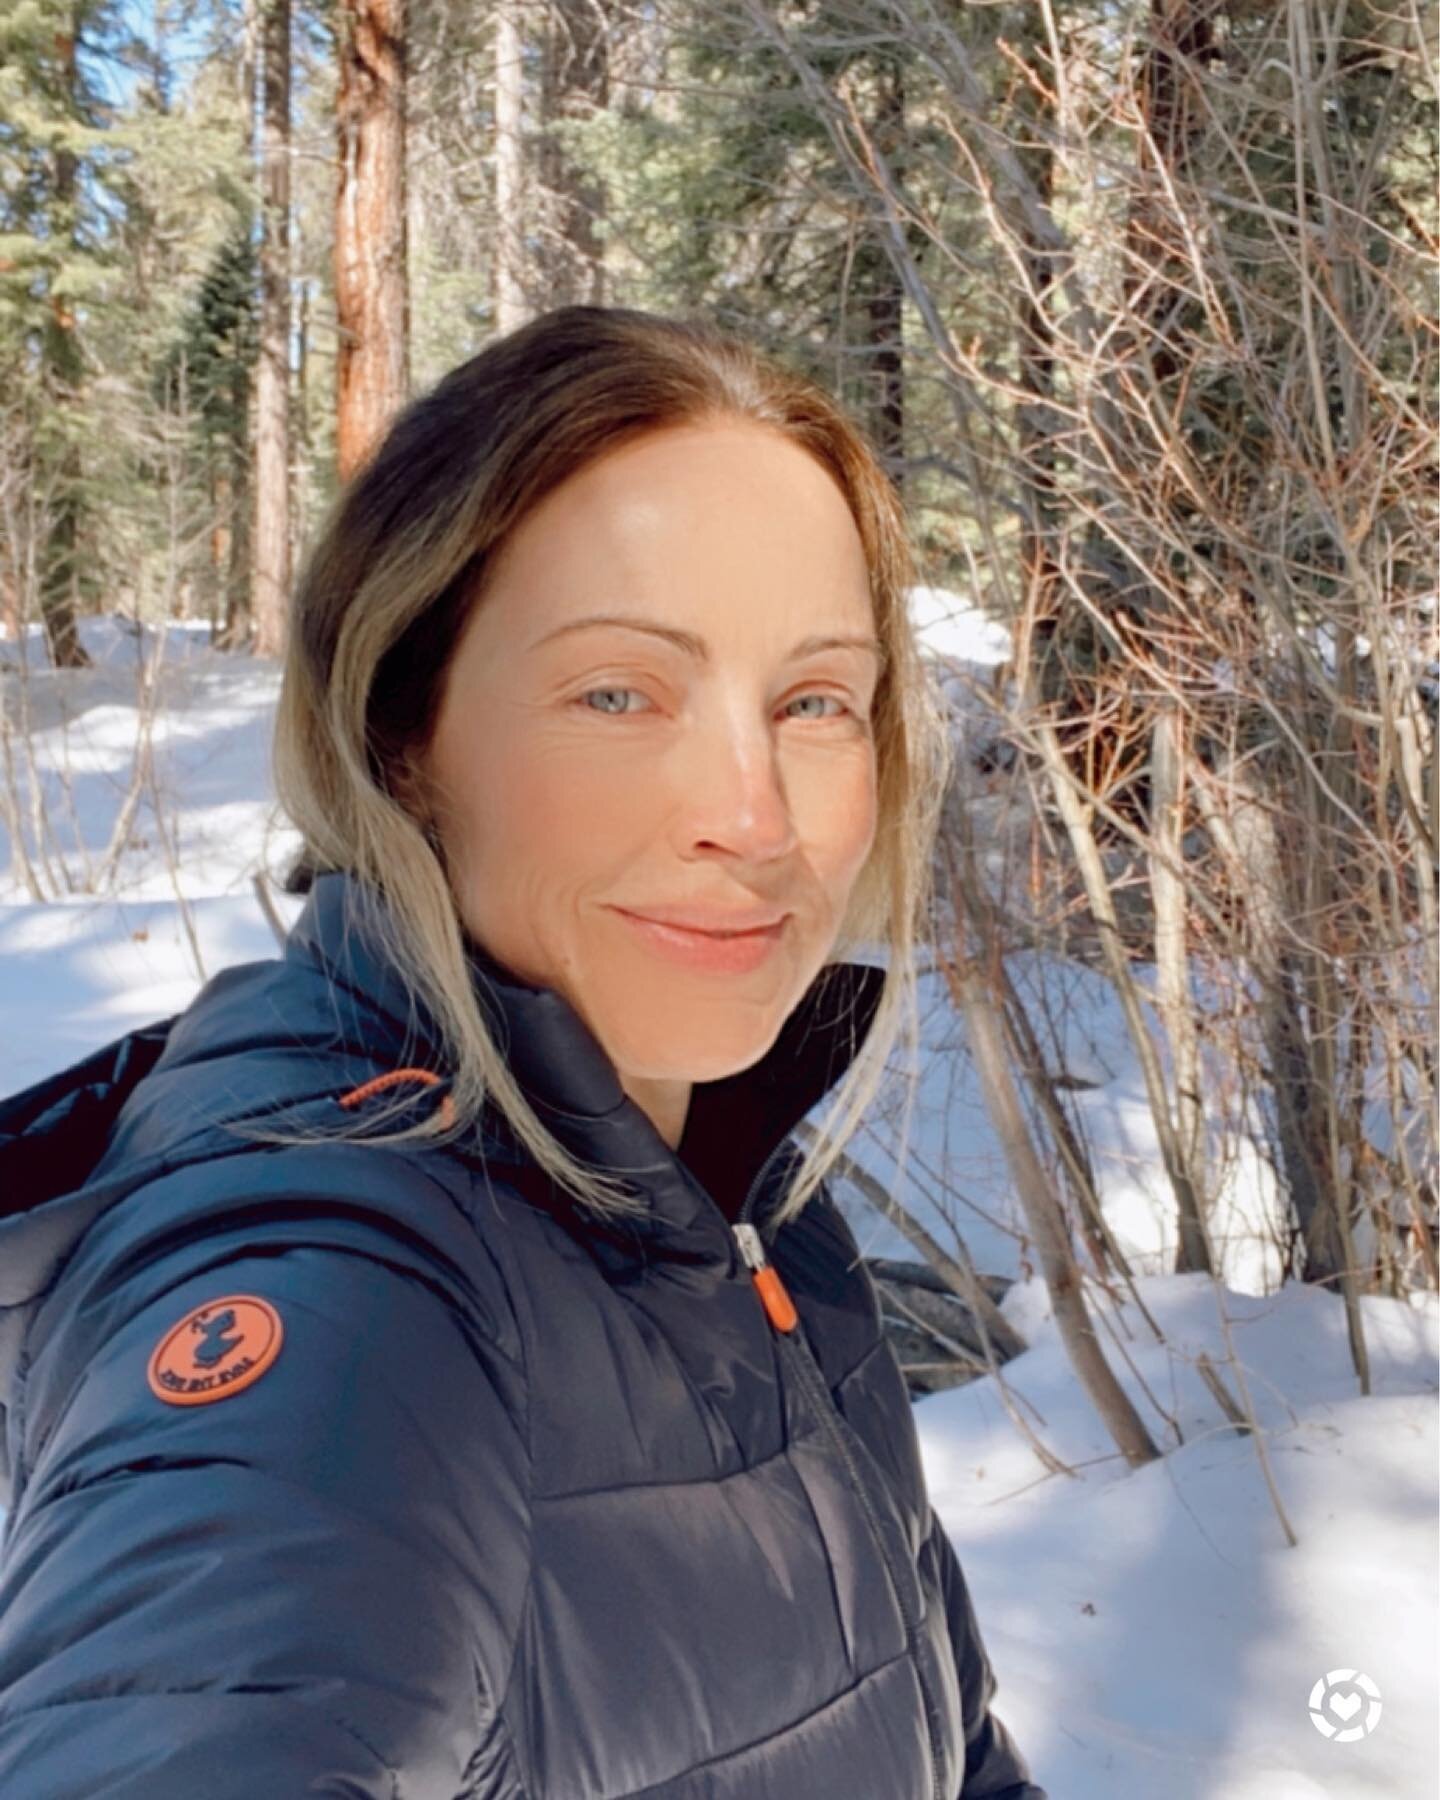 Just out here on the woods in my @save_the_duck feather free coat feeling super superior because no animal was harmed. So there 😛 

#shopvetted #savetheduck #featherfree #animalfree #noanimalsharmed #crueltyfree #crueltyfreefashion #savetheanimals #